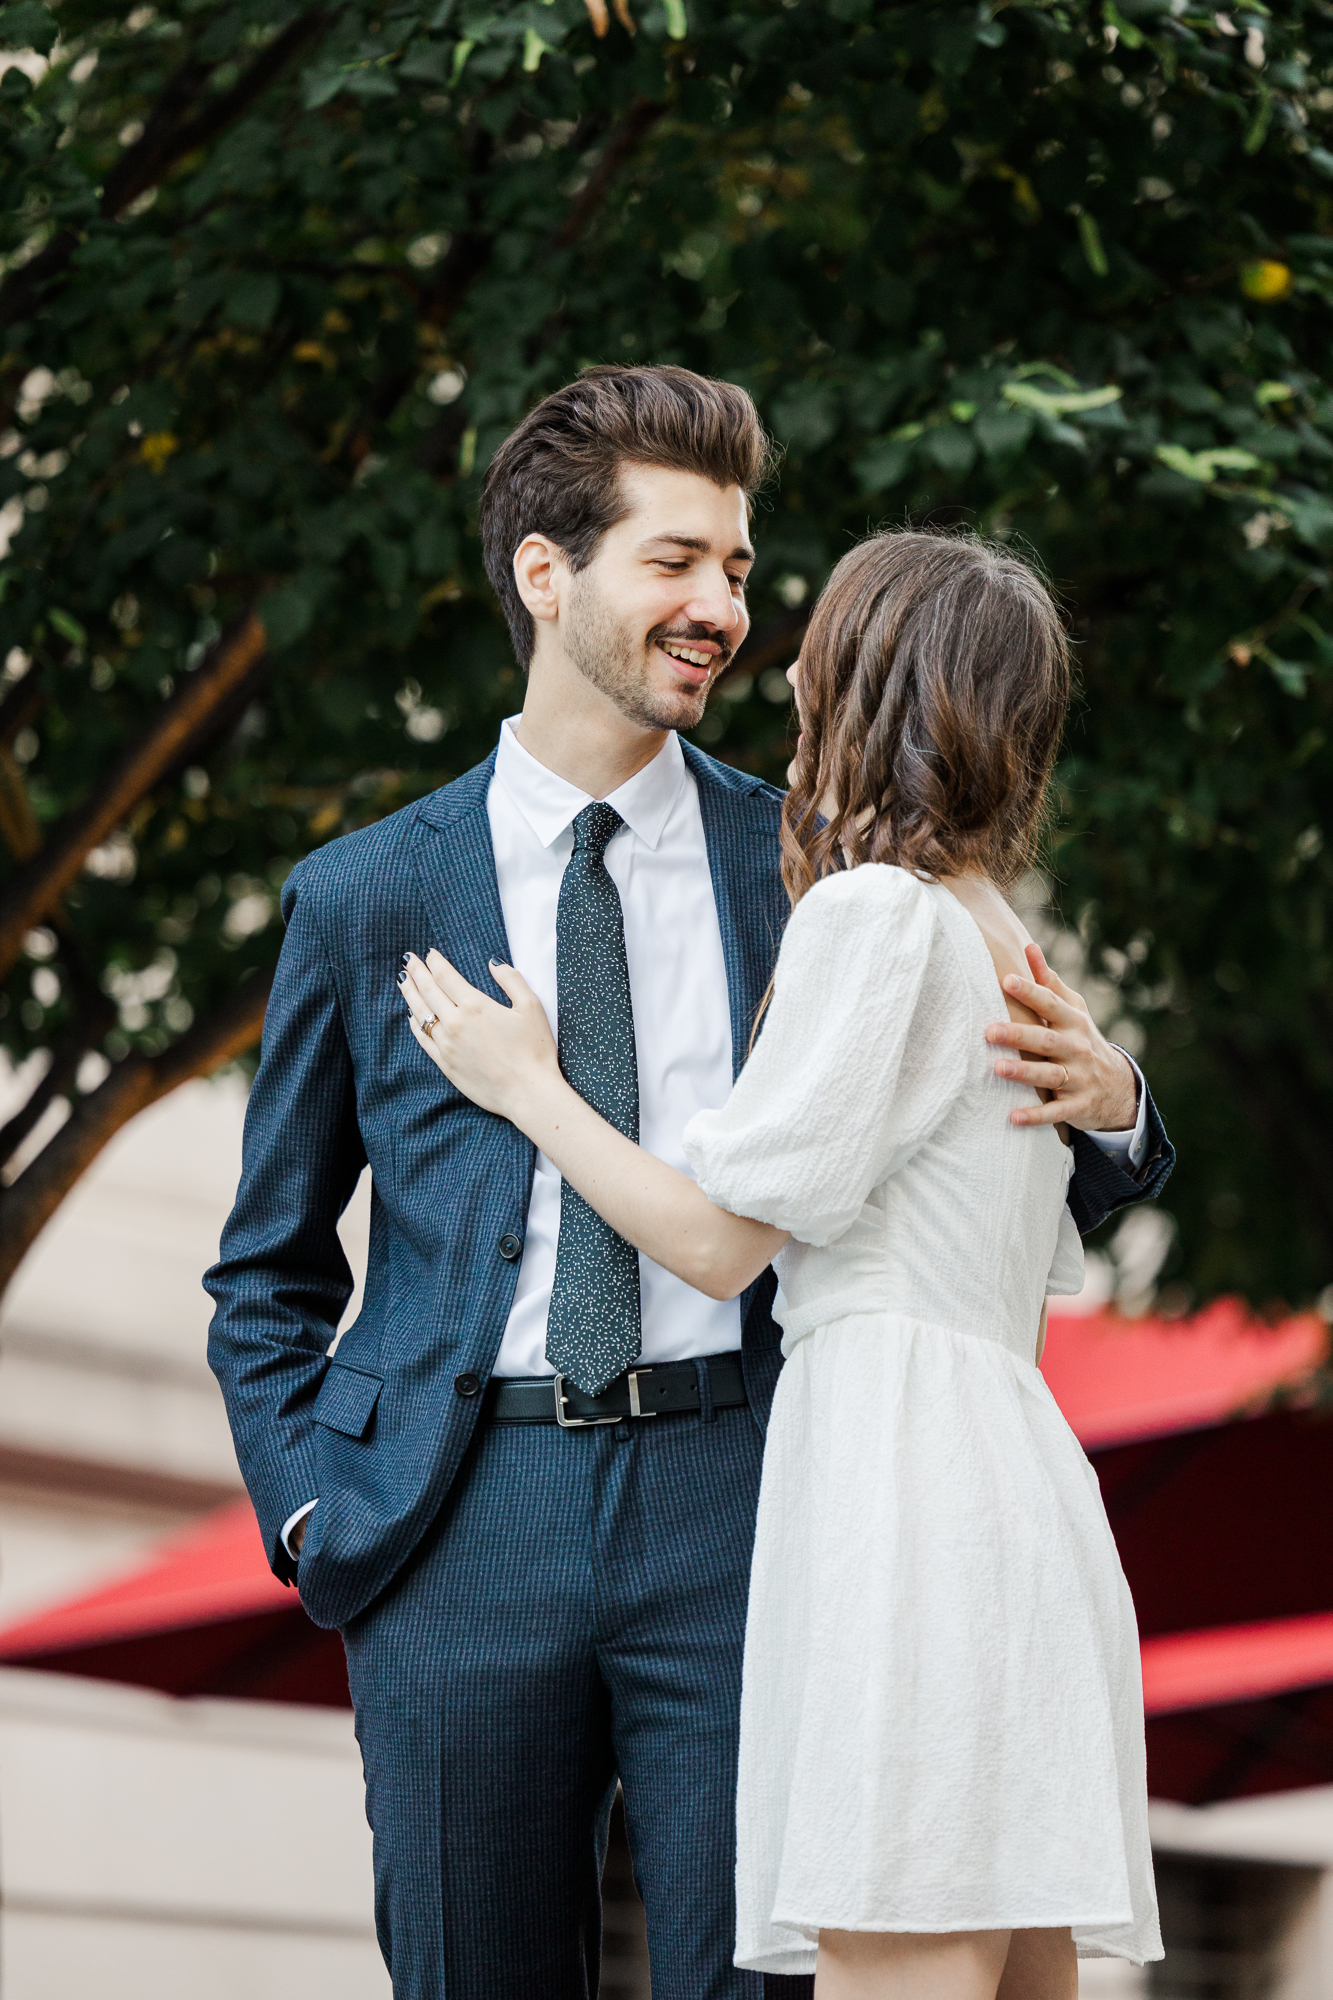 Striking Central Park Engagement Photos in NYC